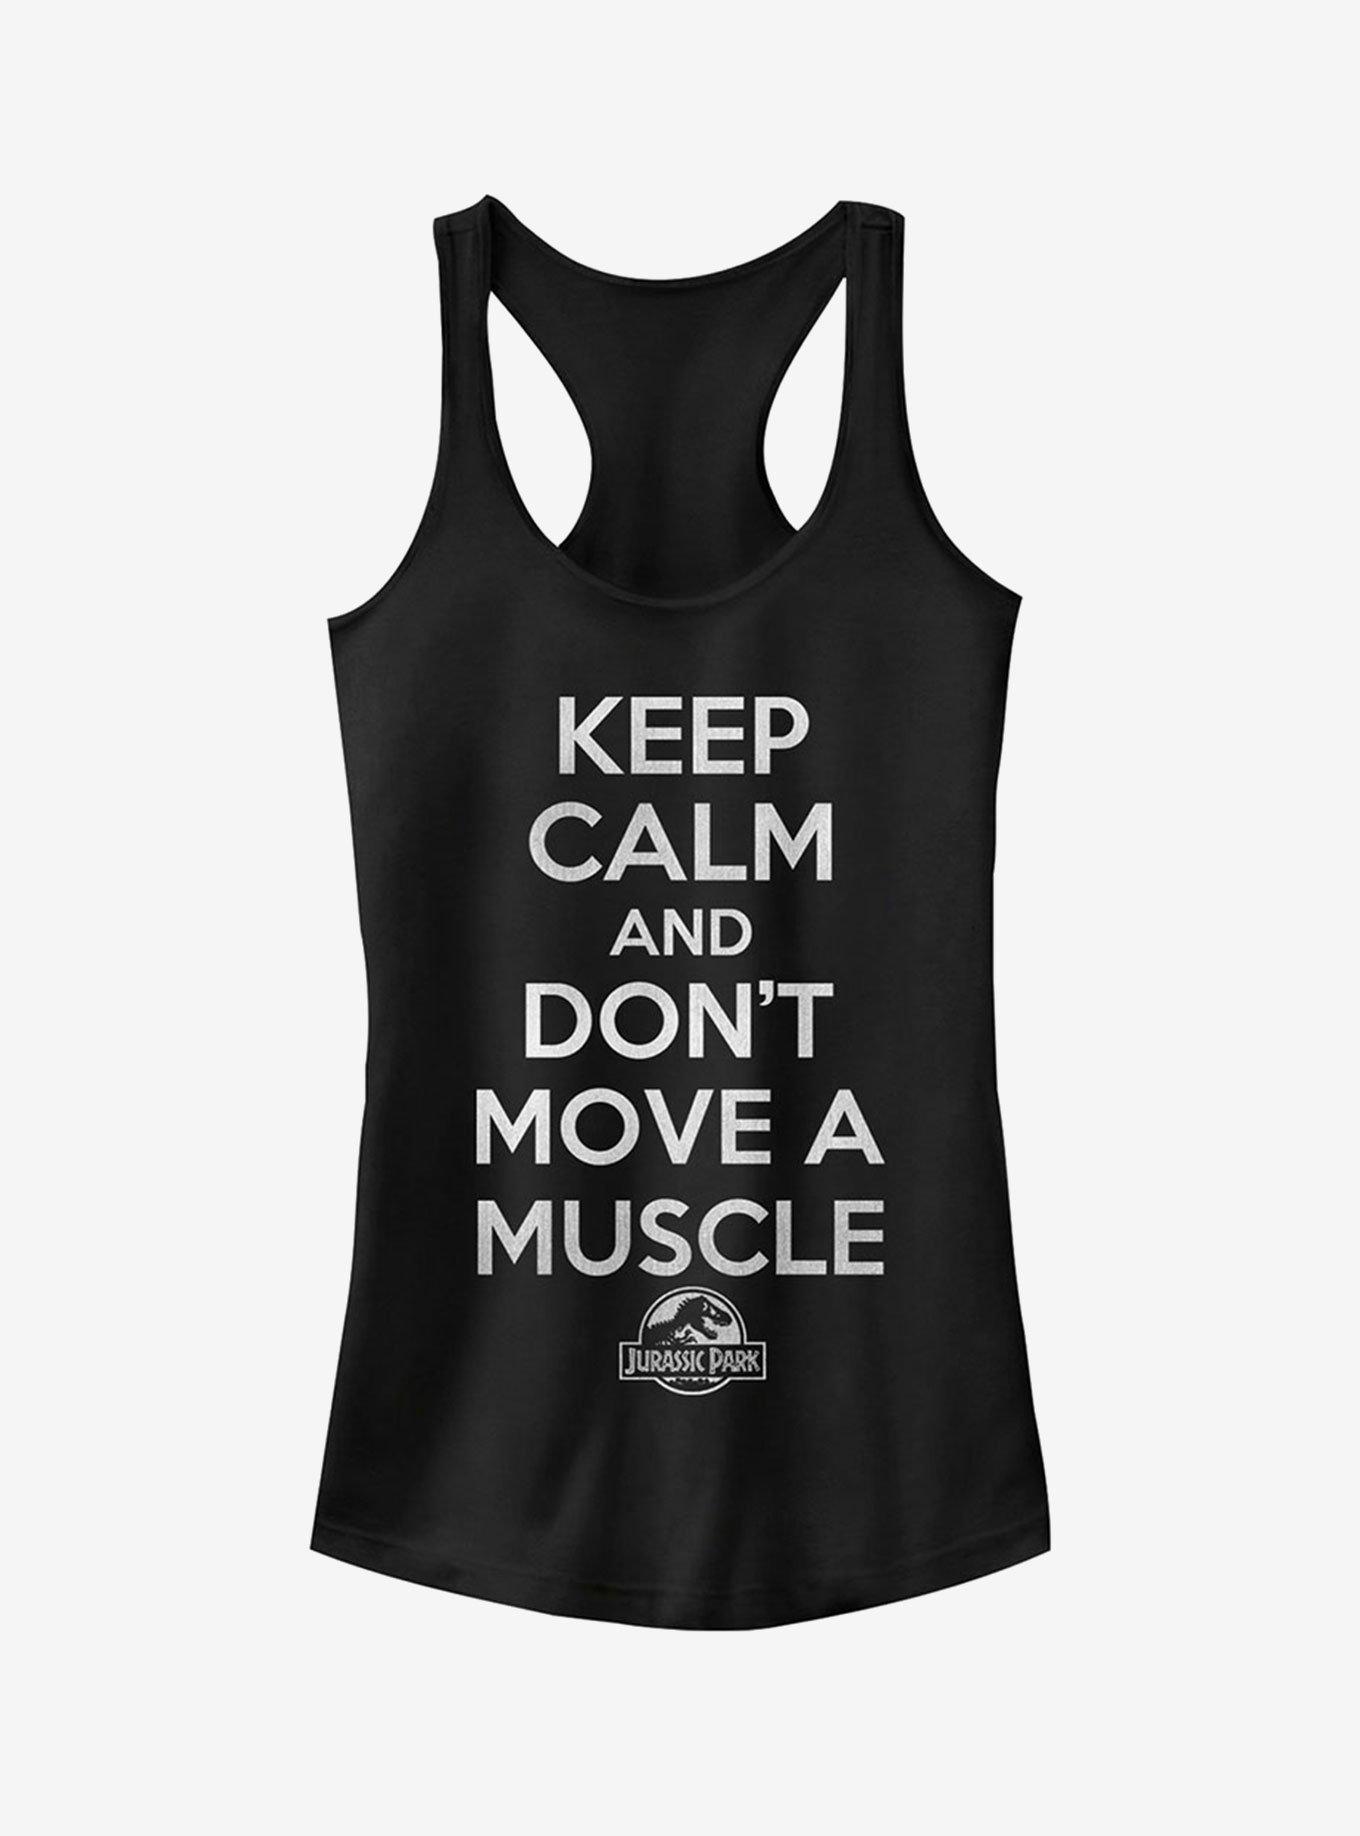 Keep Calm and Don't Move a Muscle Girls Tank, BLACK, hi-res